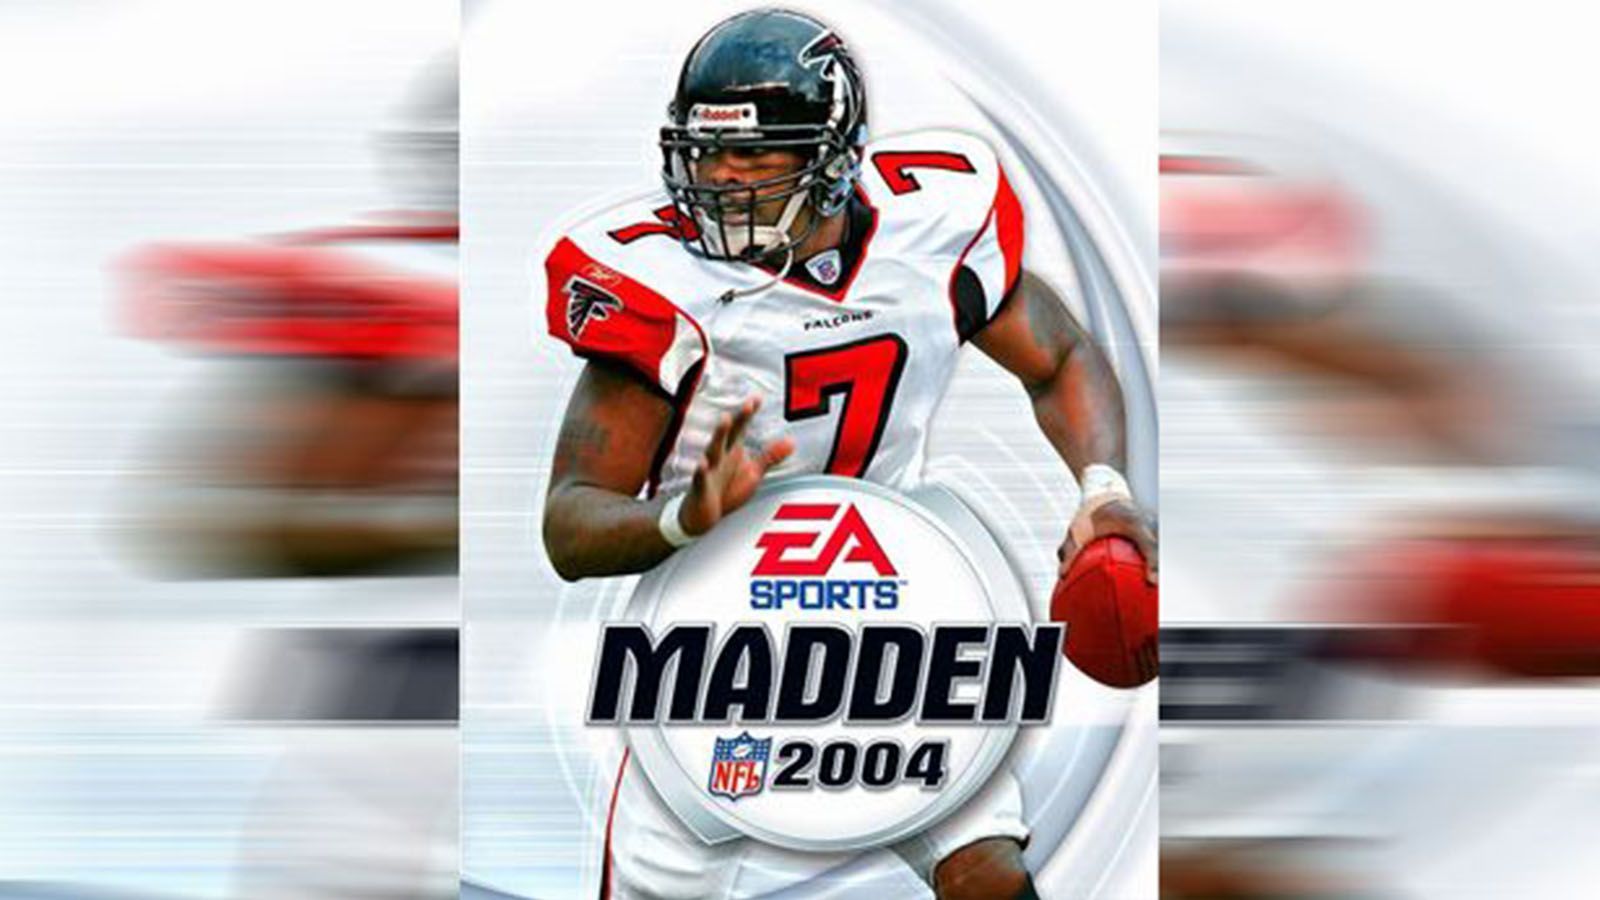 
                <strong>Madden NFL 2004</strong><br>
                Madden NFL 2004 - Cover-Spieler: Michael Vick.
              